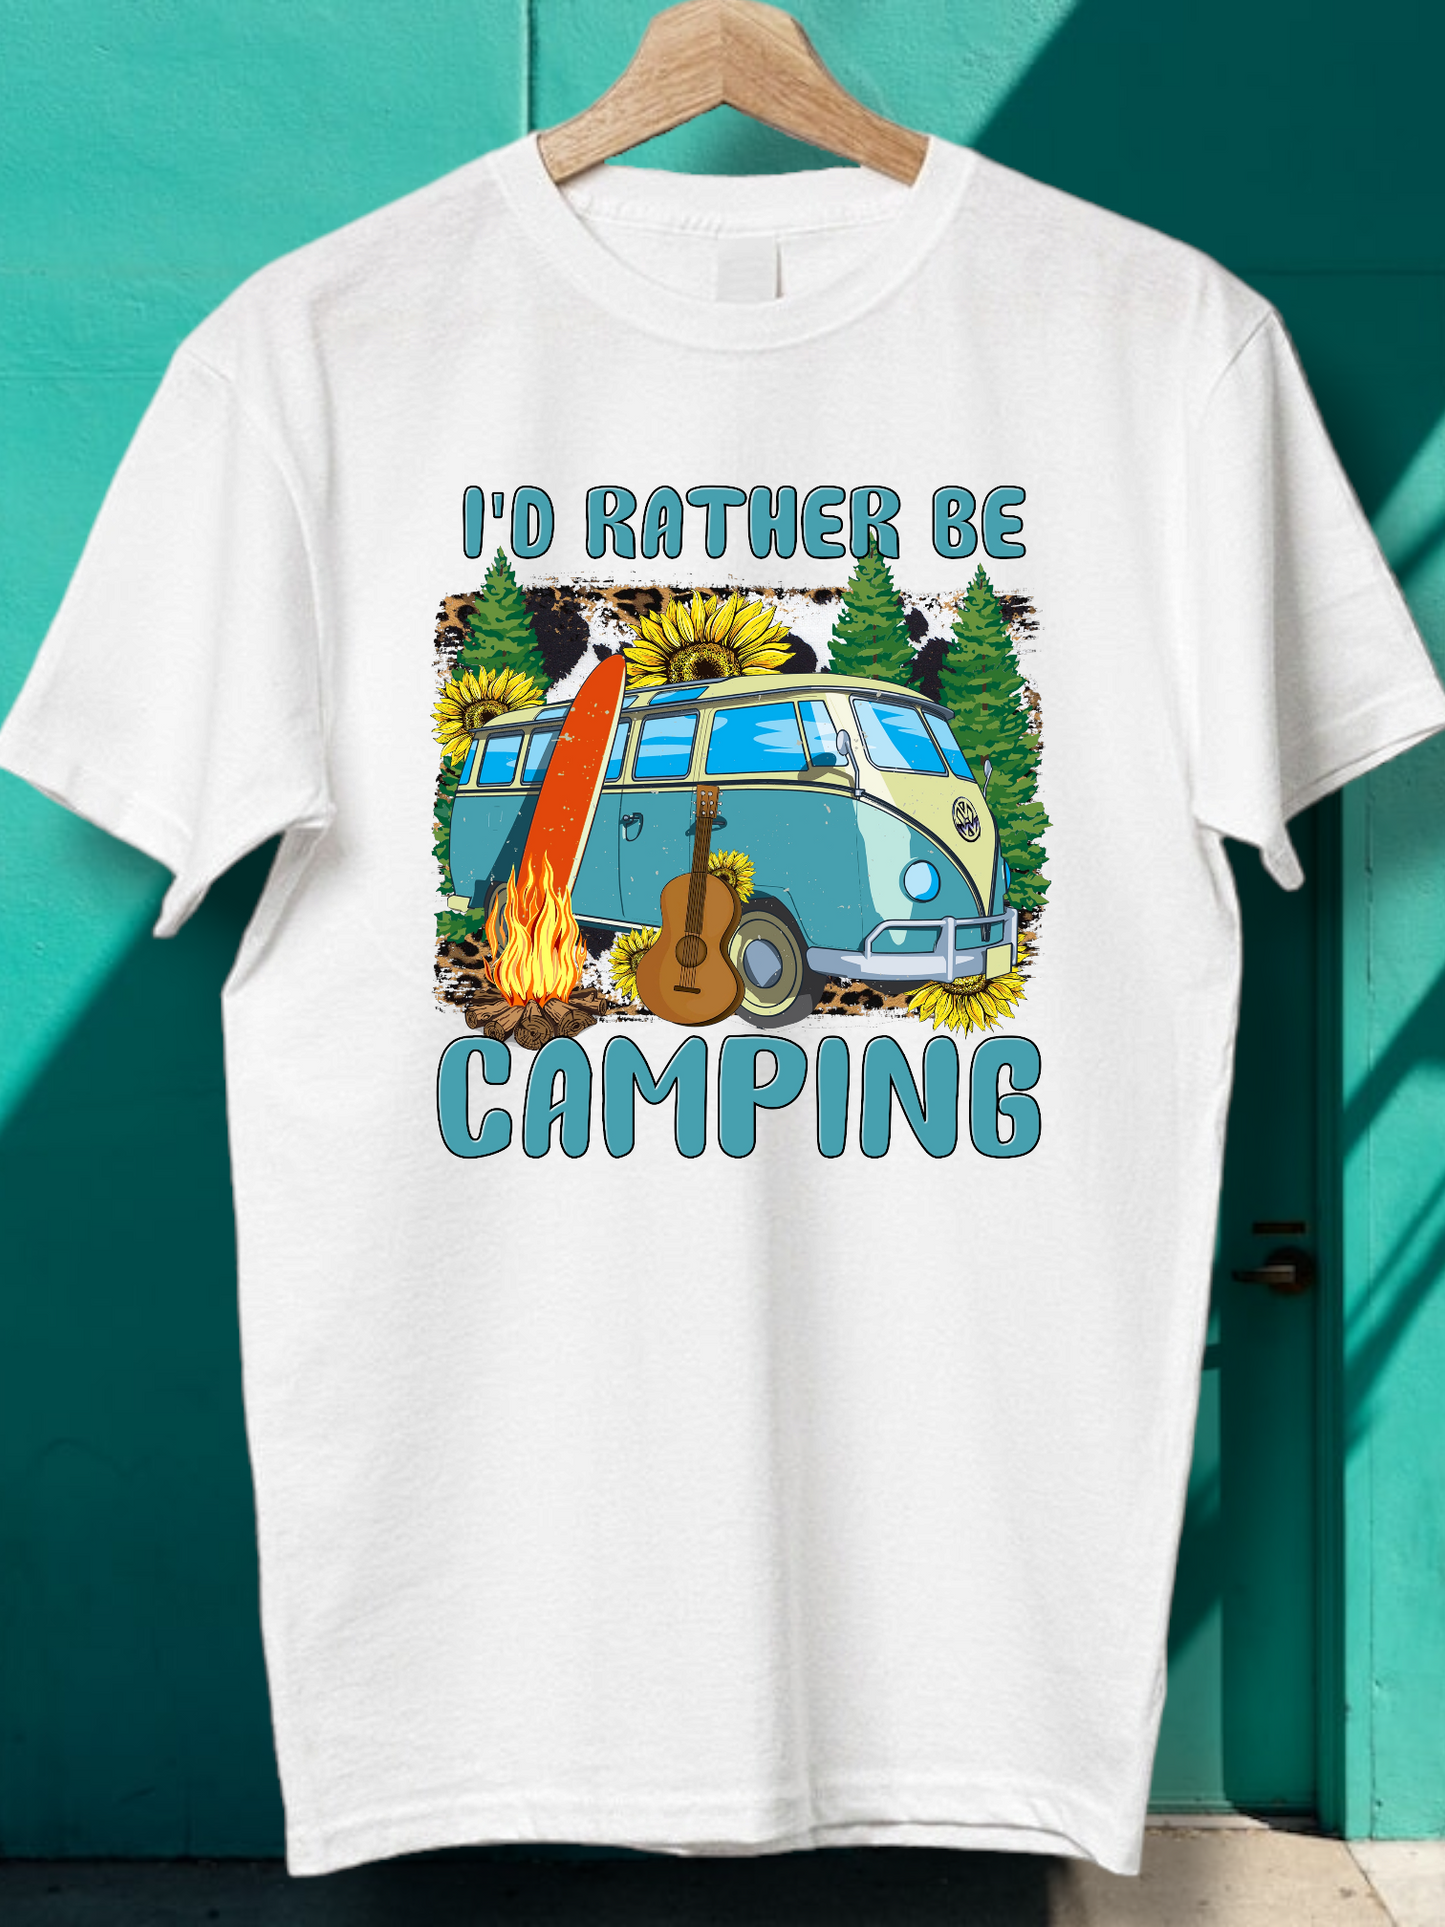 I'D RATHER BE CAMPING